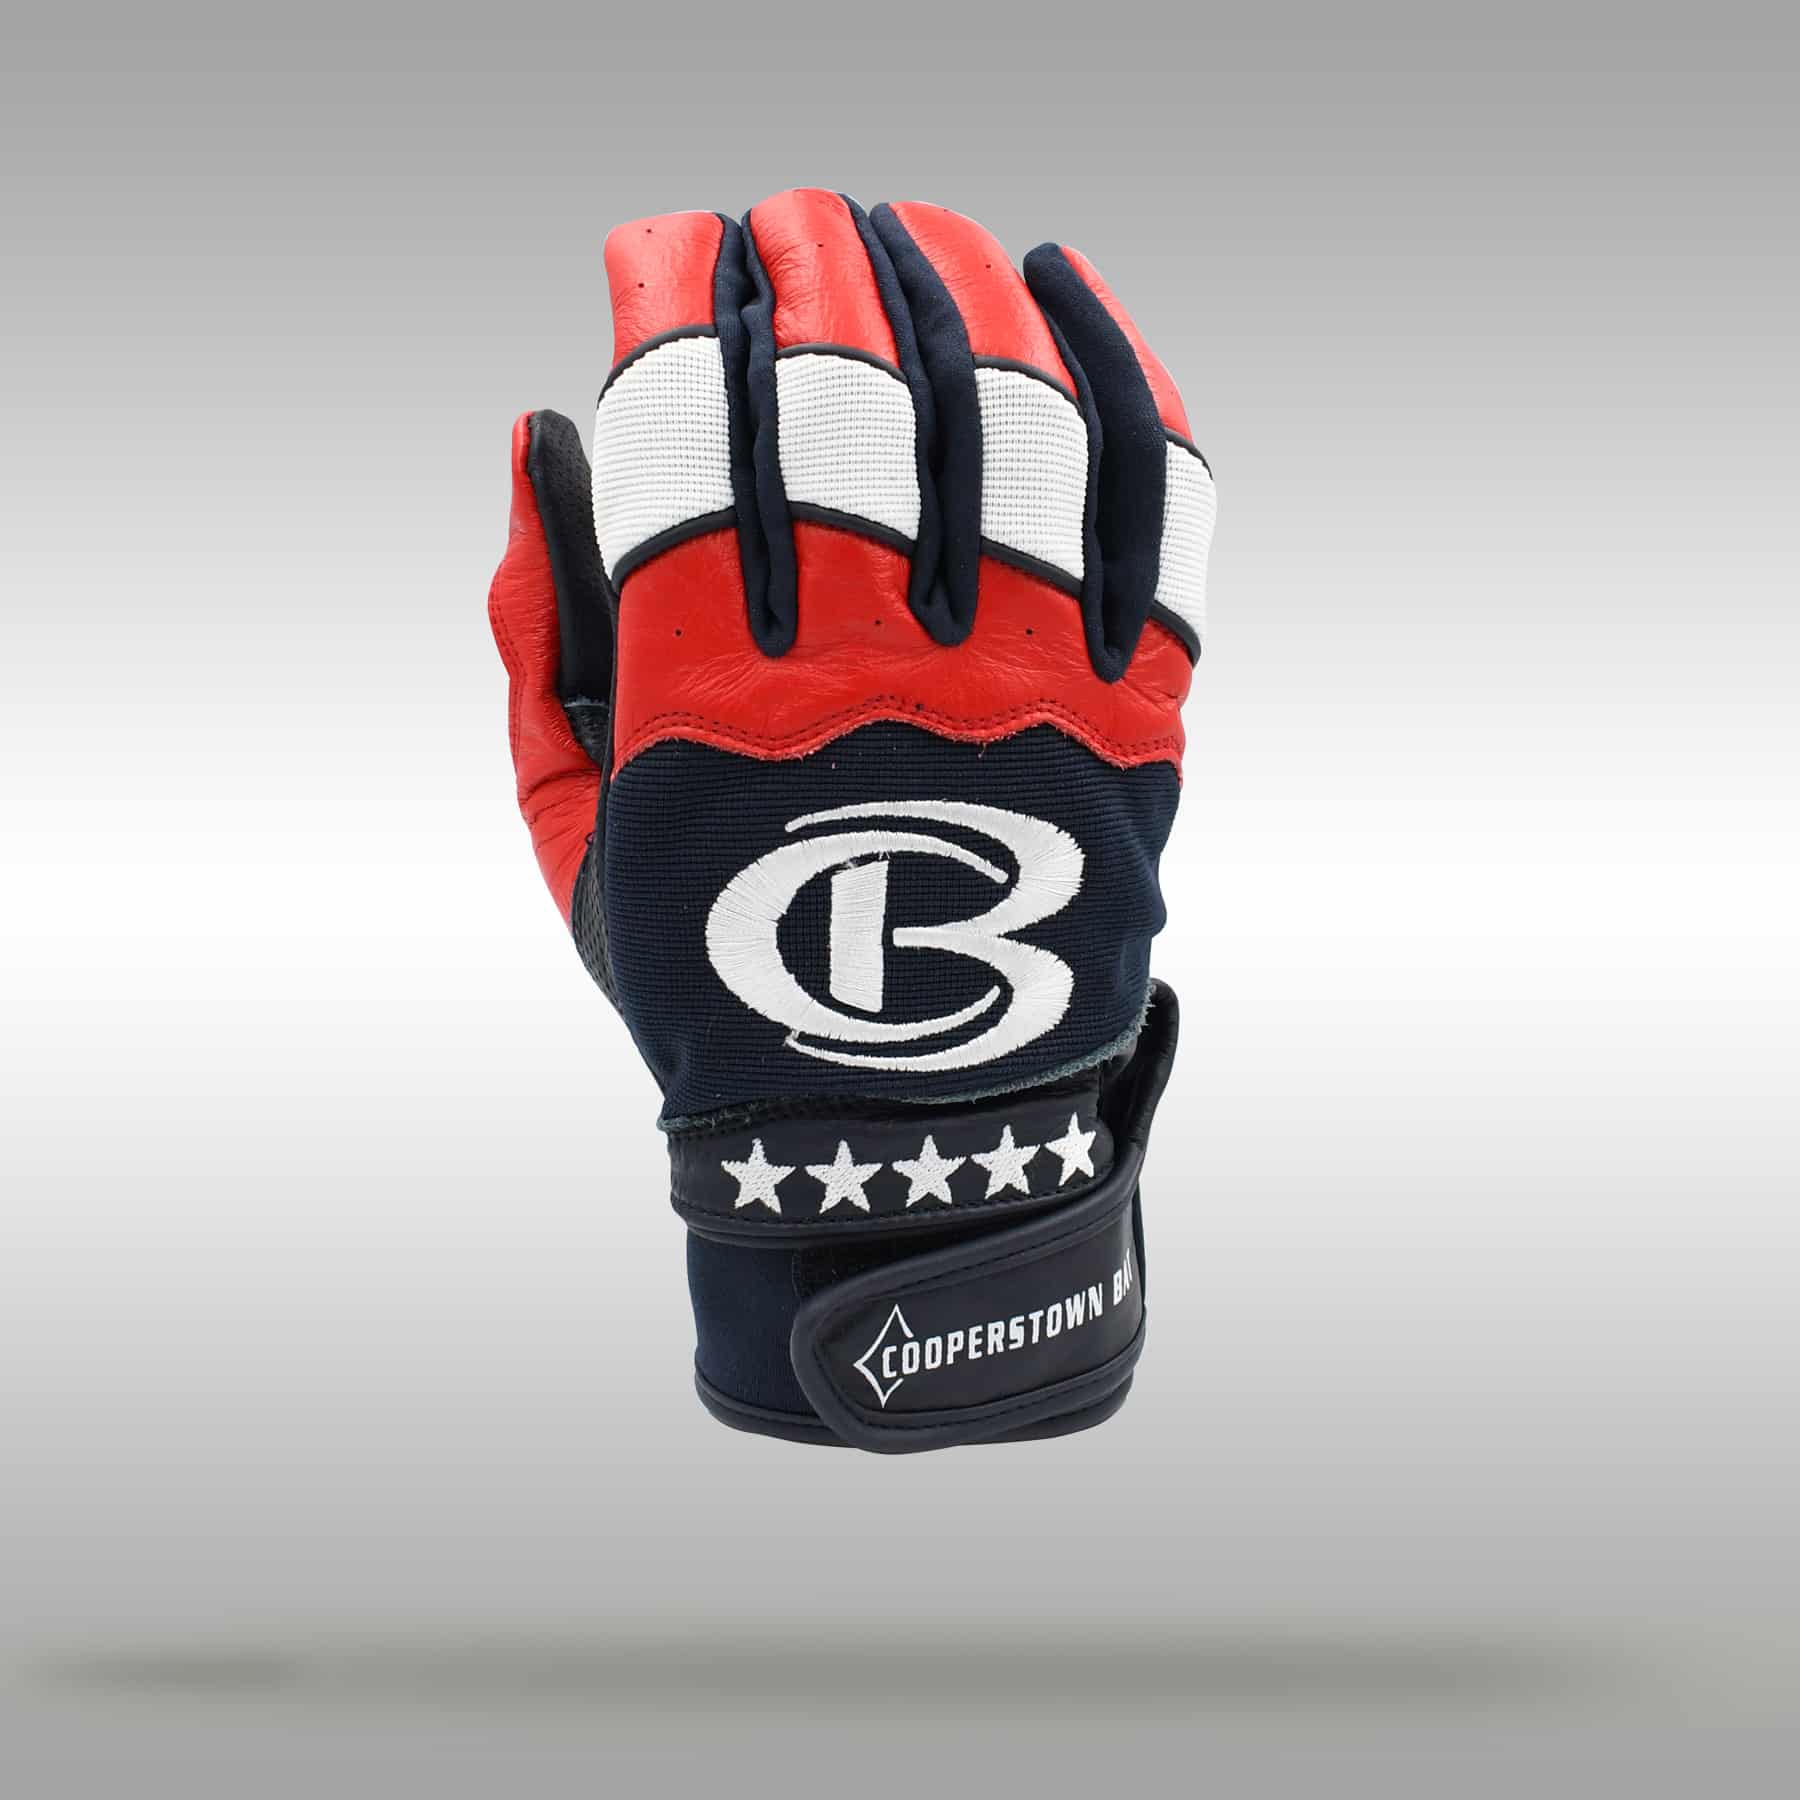 Cooperstown Bat Red/White/Blue Tactical Batting Glove